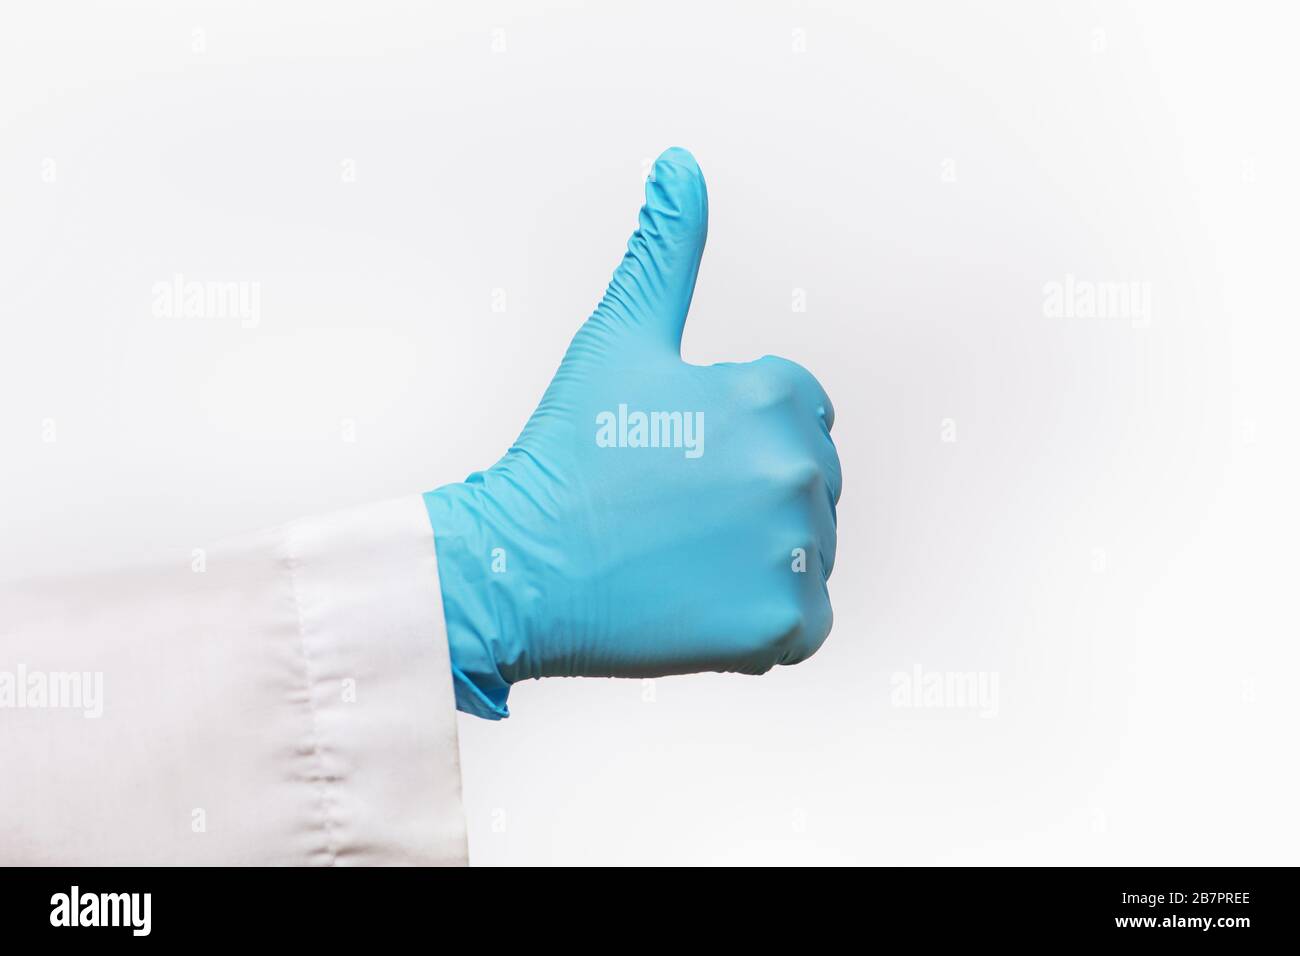 Partial view of hand wearing blue latex glove giving thumbs up on white background. Stock Photo